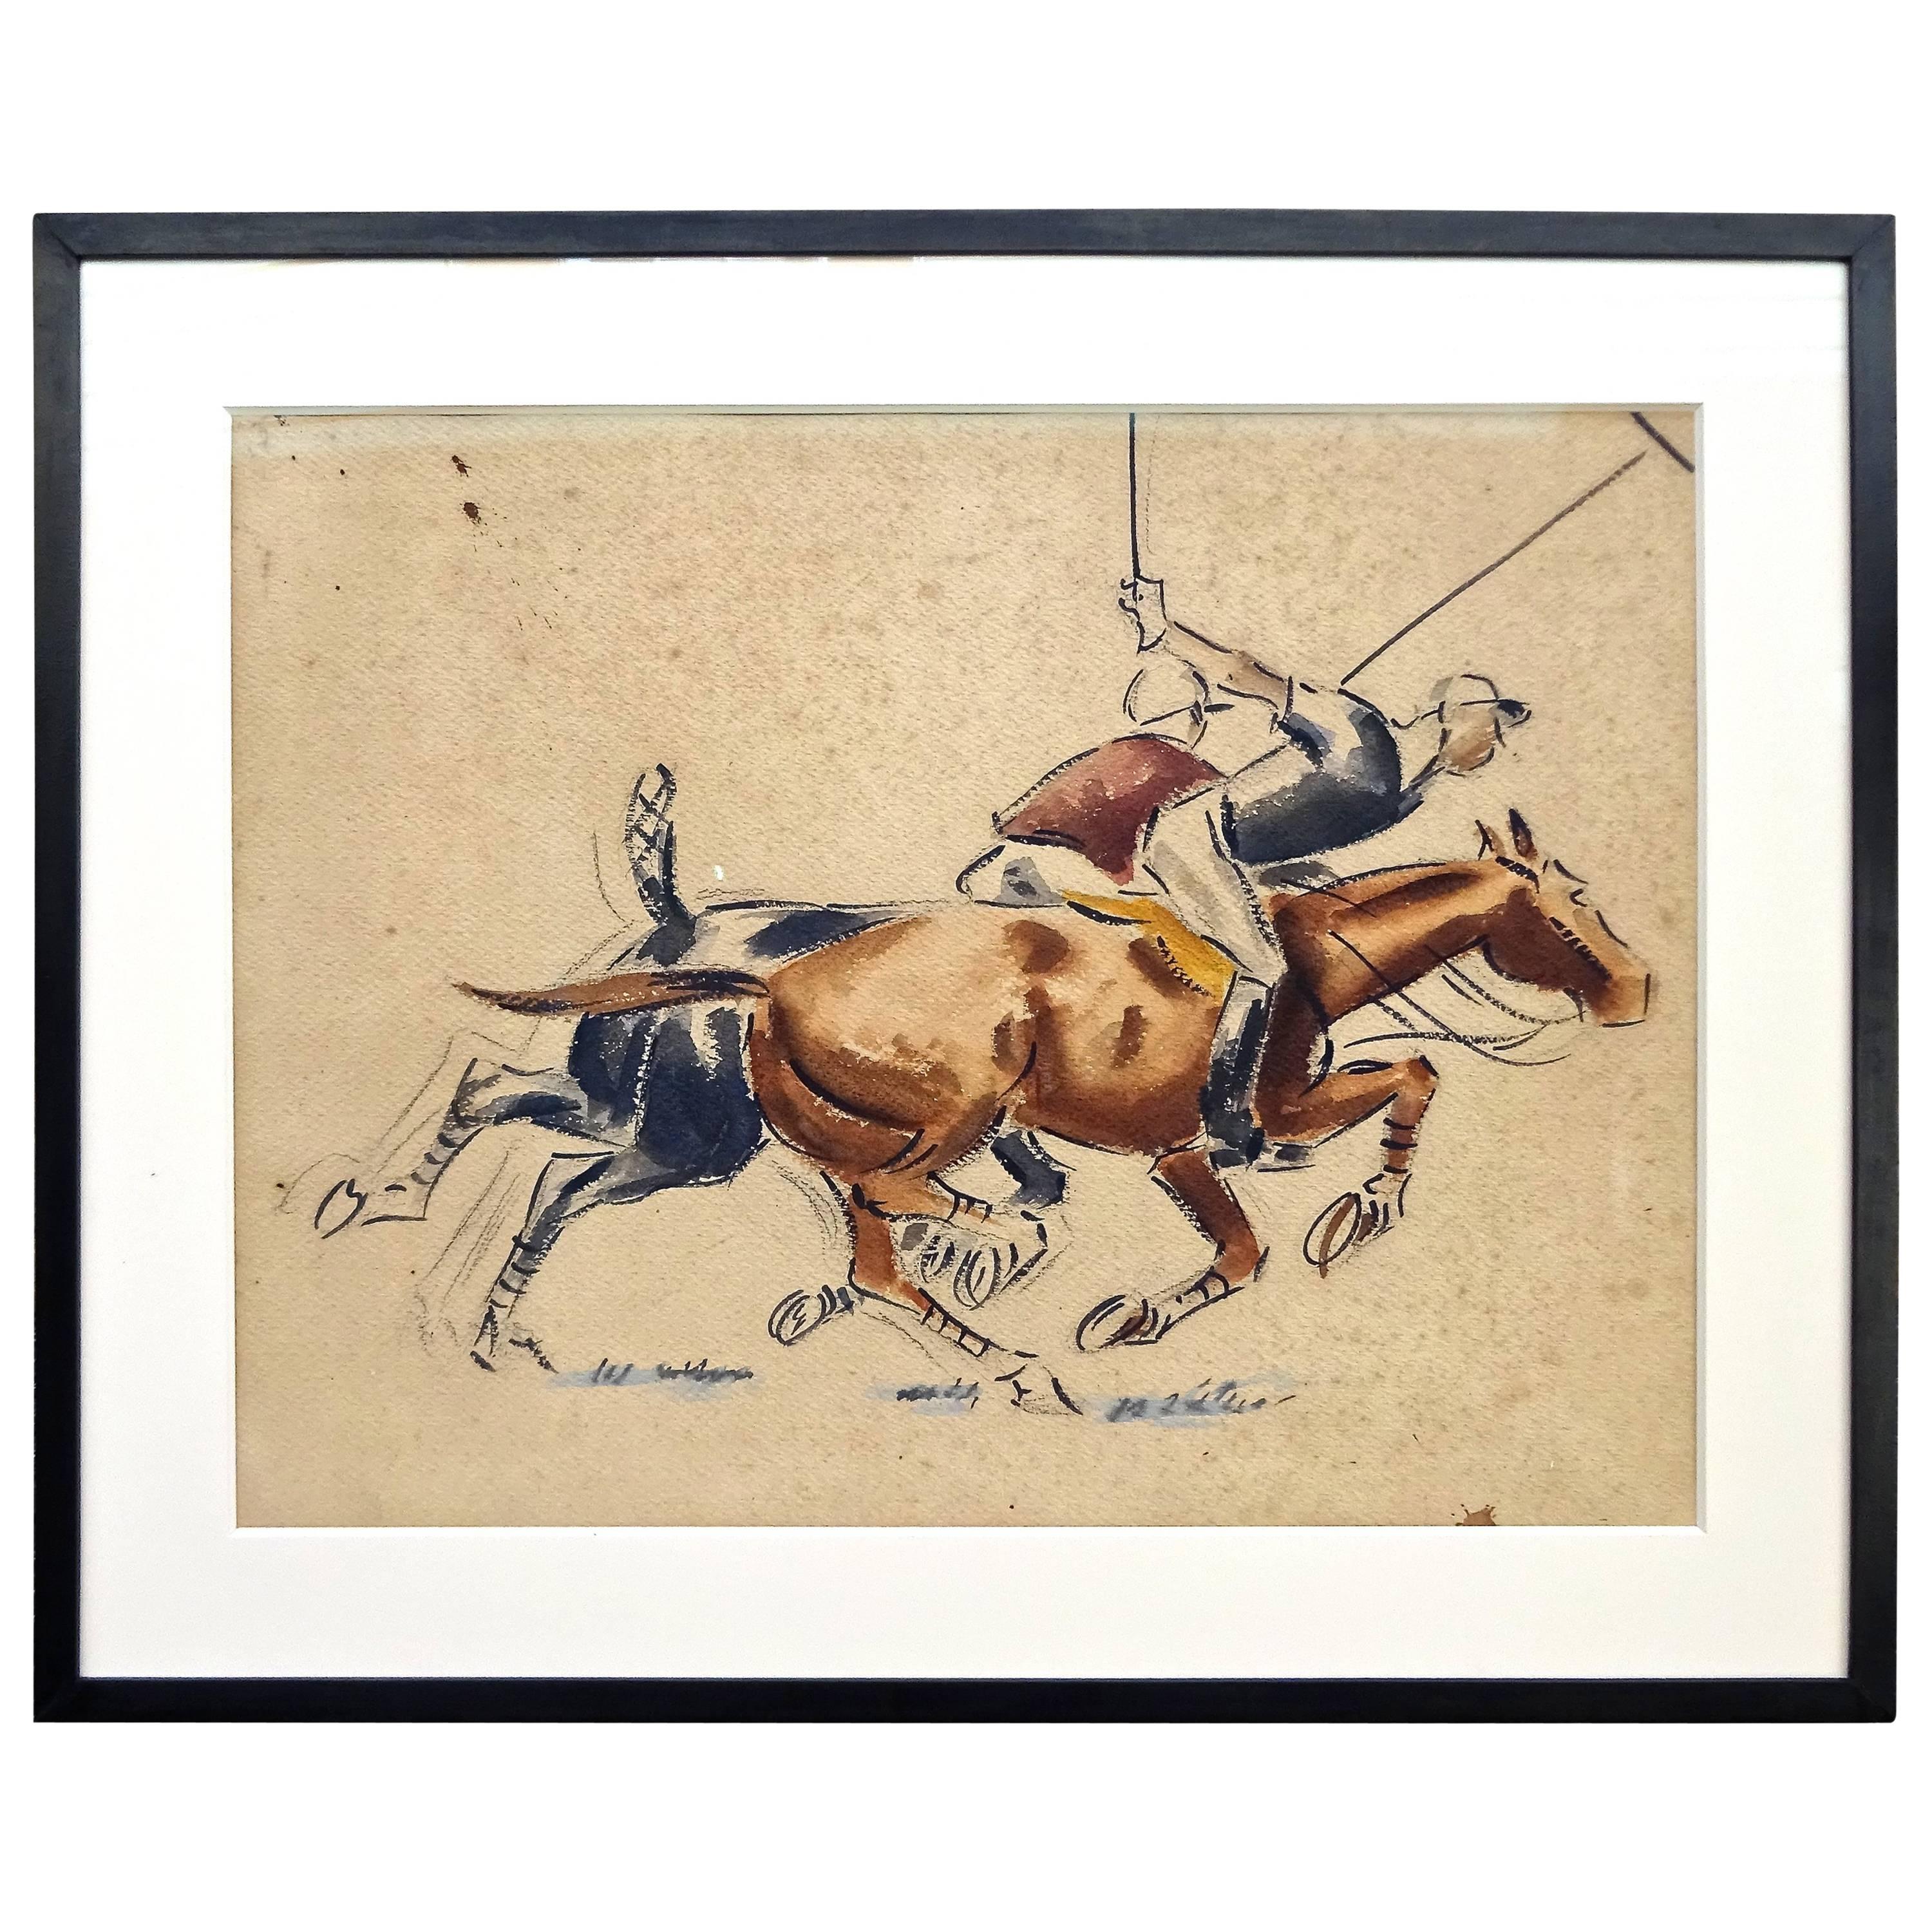 Chic 1930s Art Deco Watercolor Painting with Polo Players